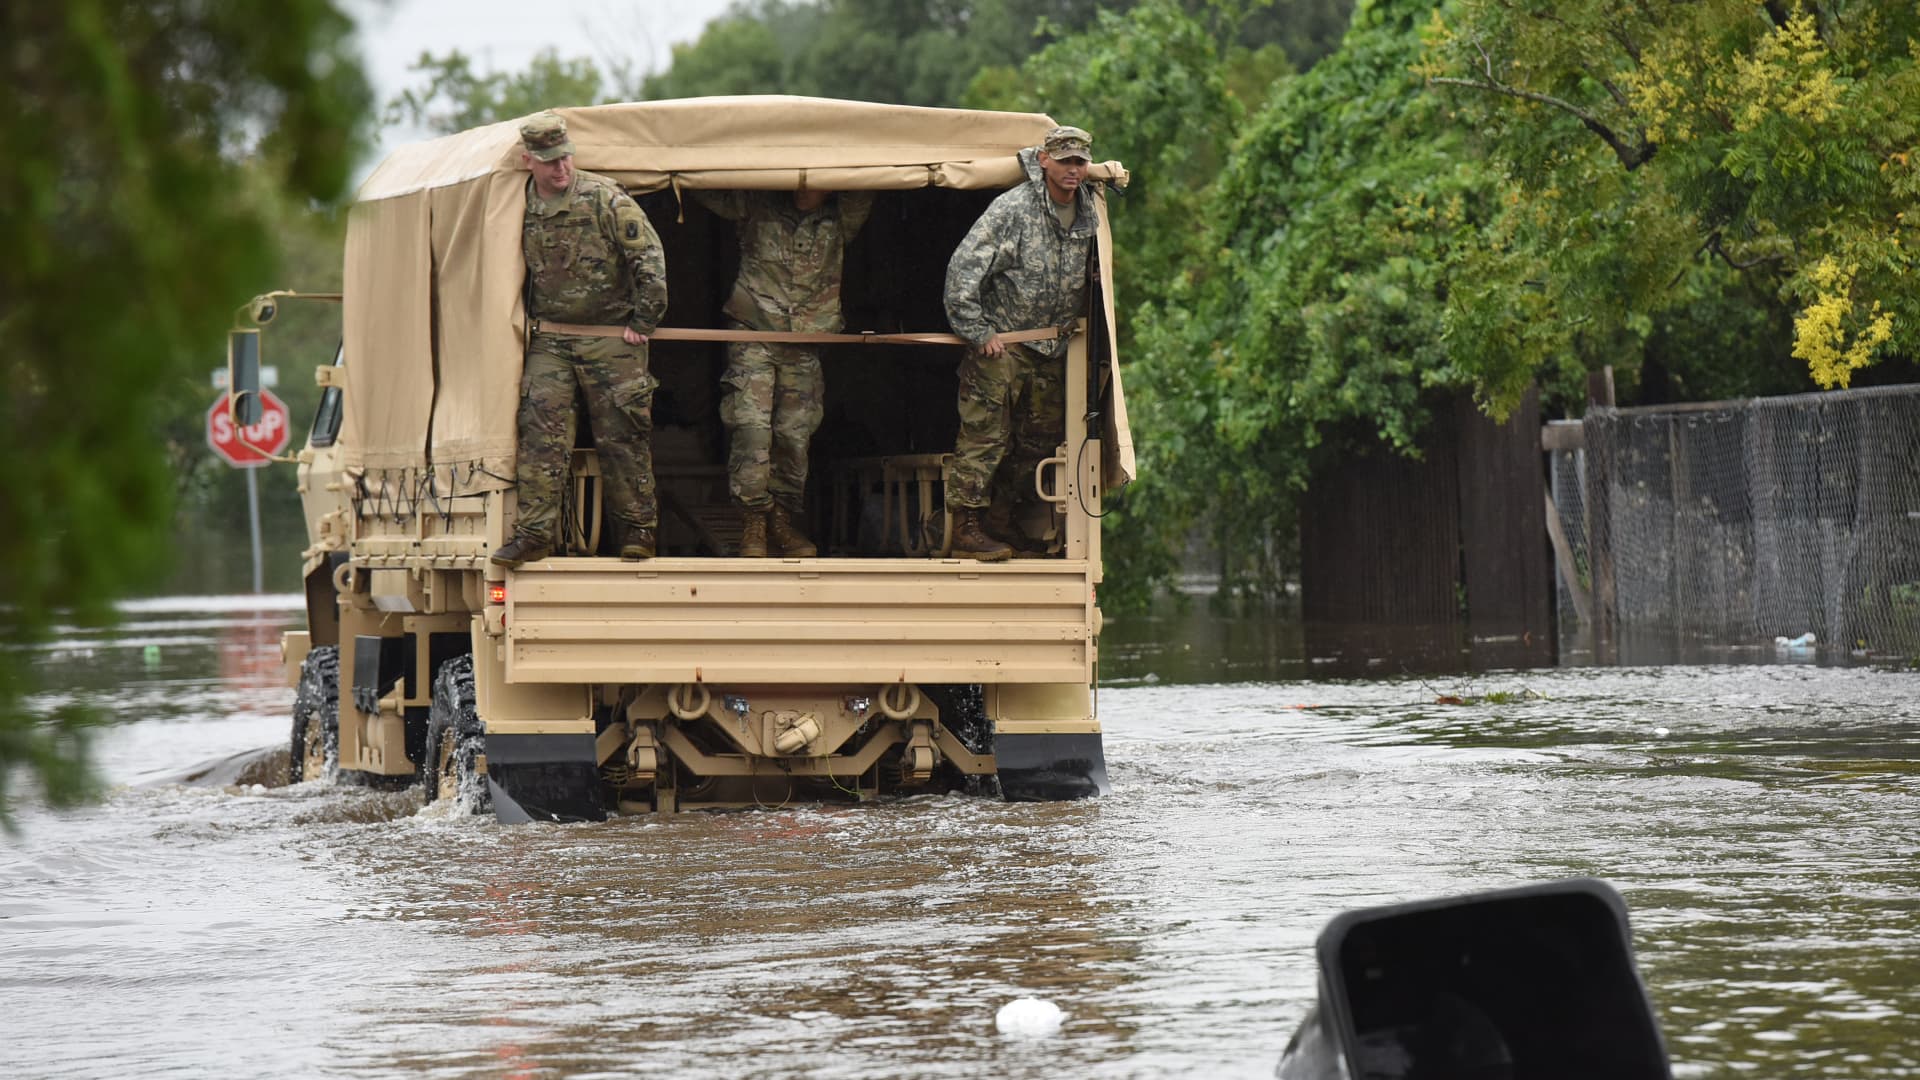 Members of the Florida National Guard look for stranded residents in a flooded neighborhood in the aftermath of Hurricane Ian on September 29, 2022 in Orlando, Florida.